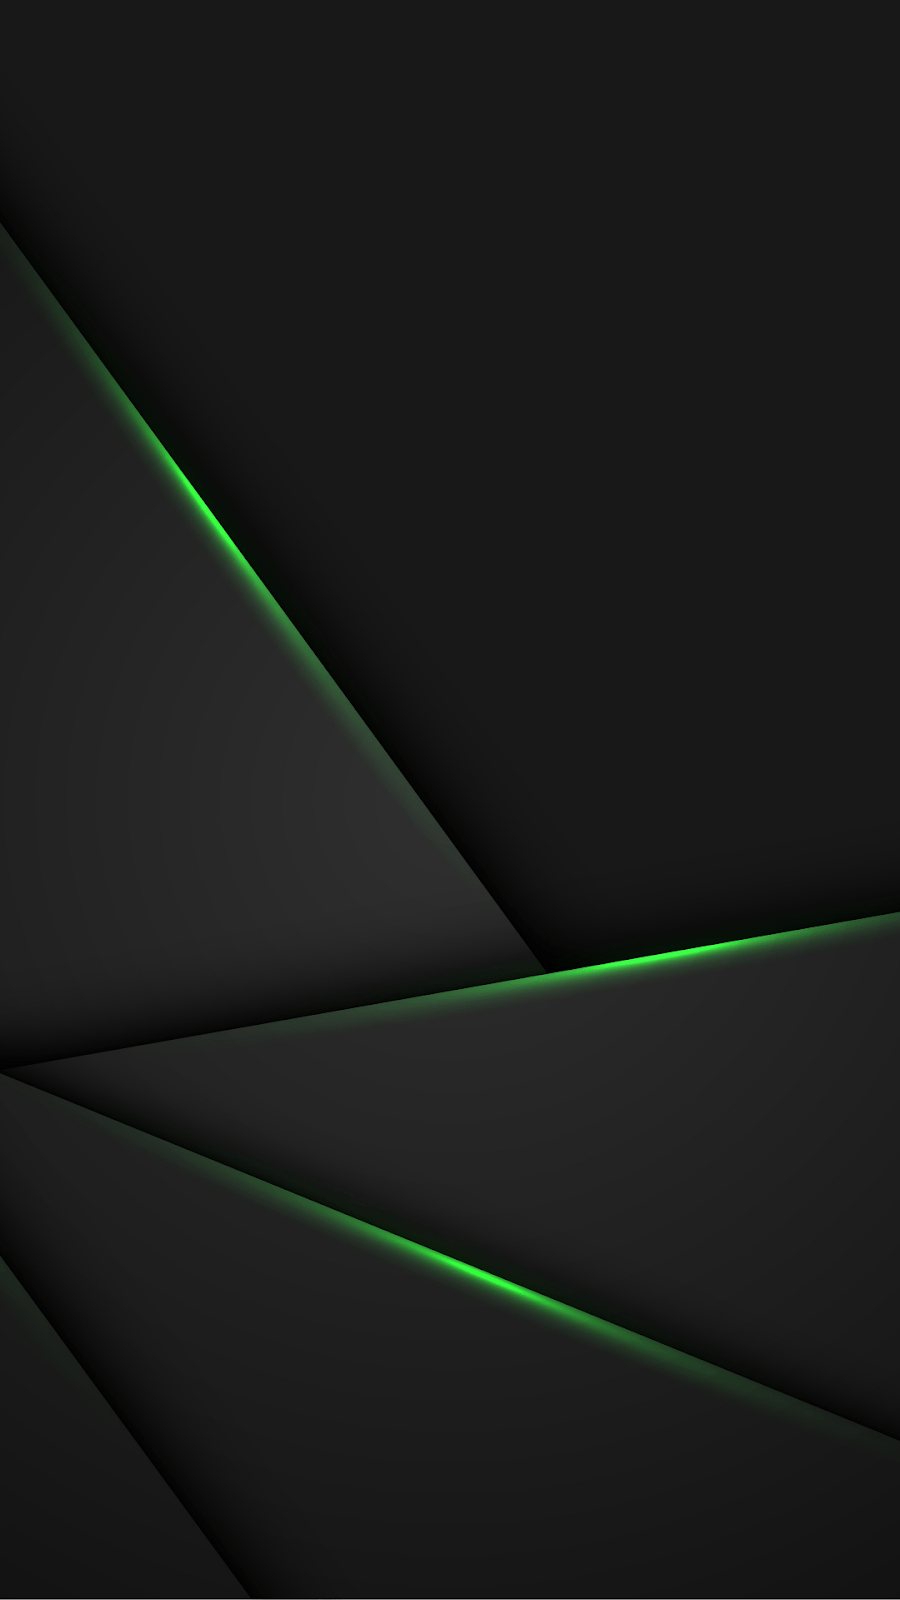 Black and green abstract wallpaper with a geometric design - Simple